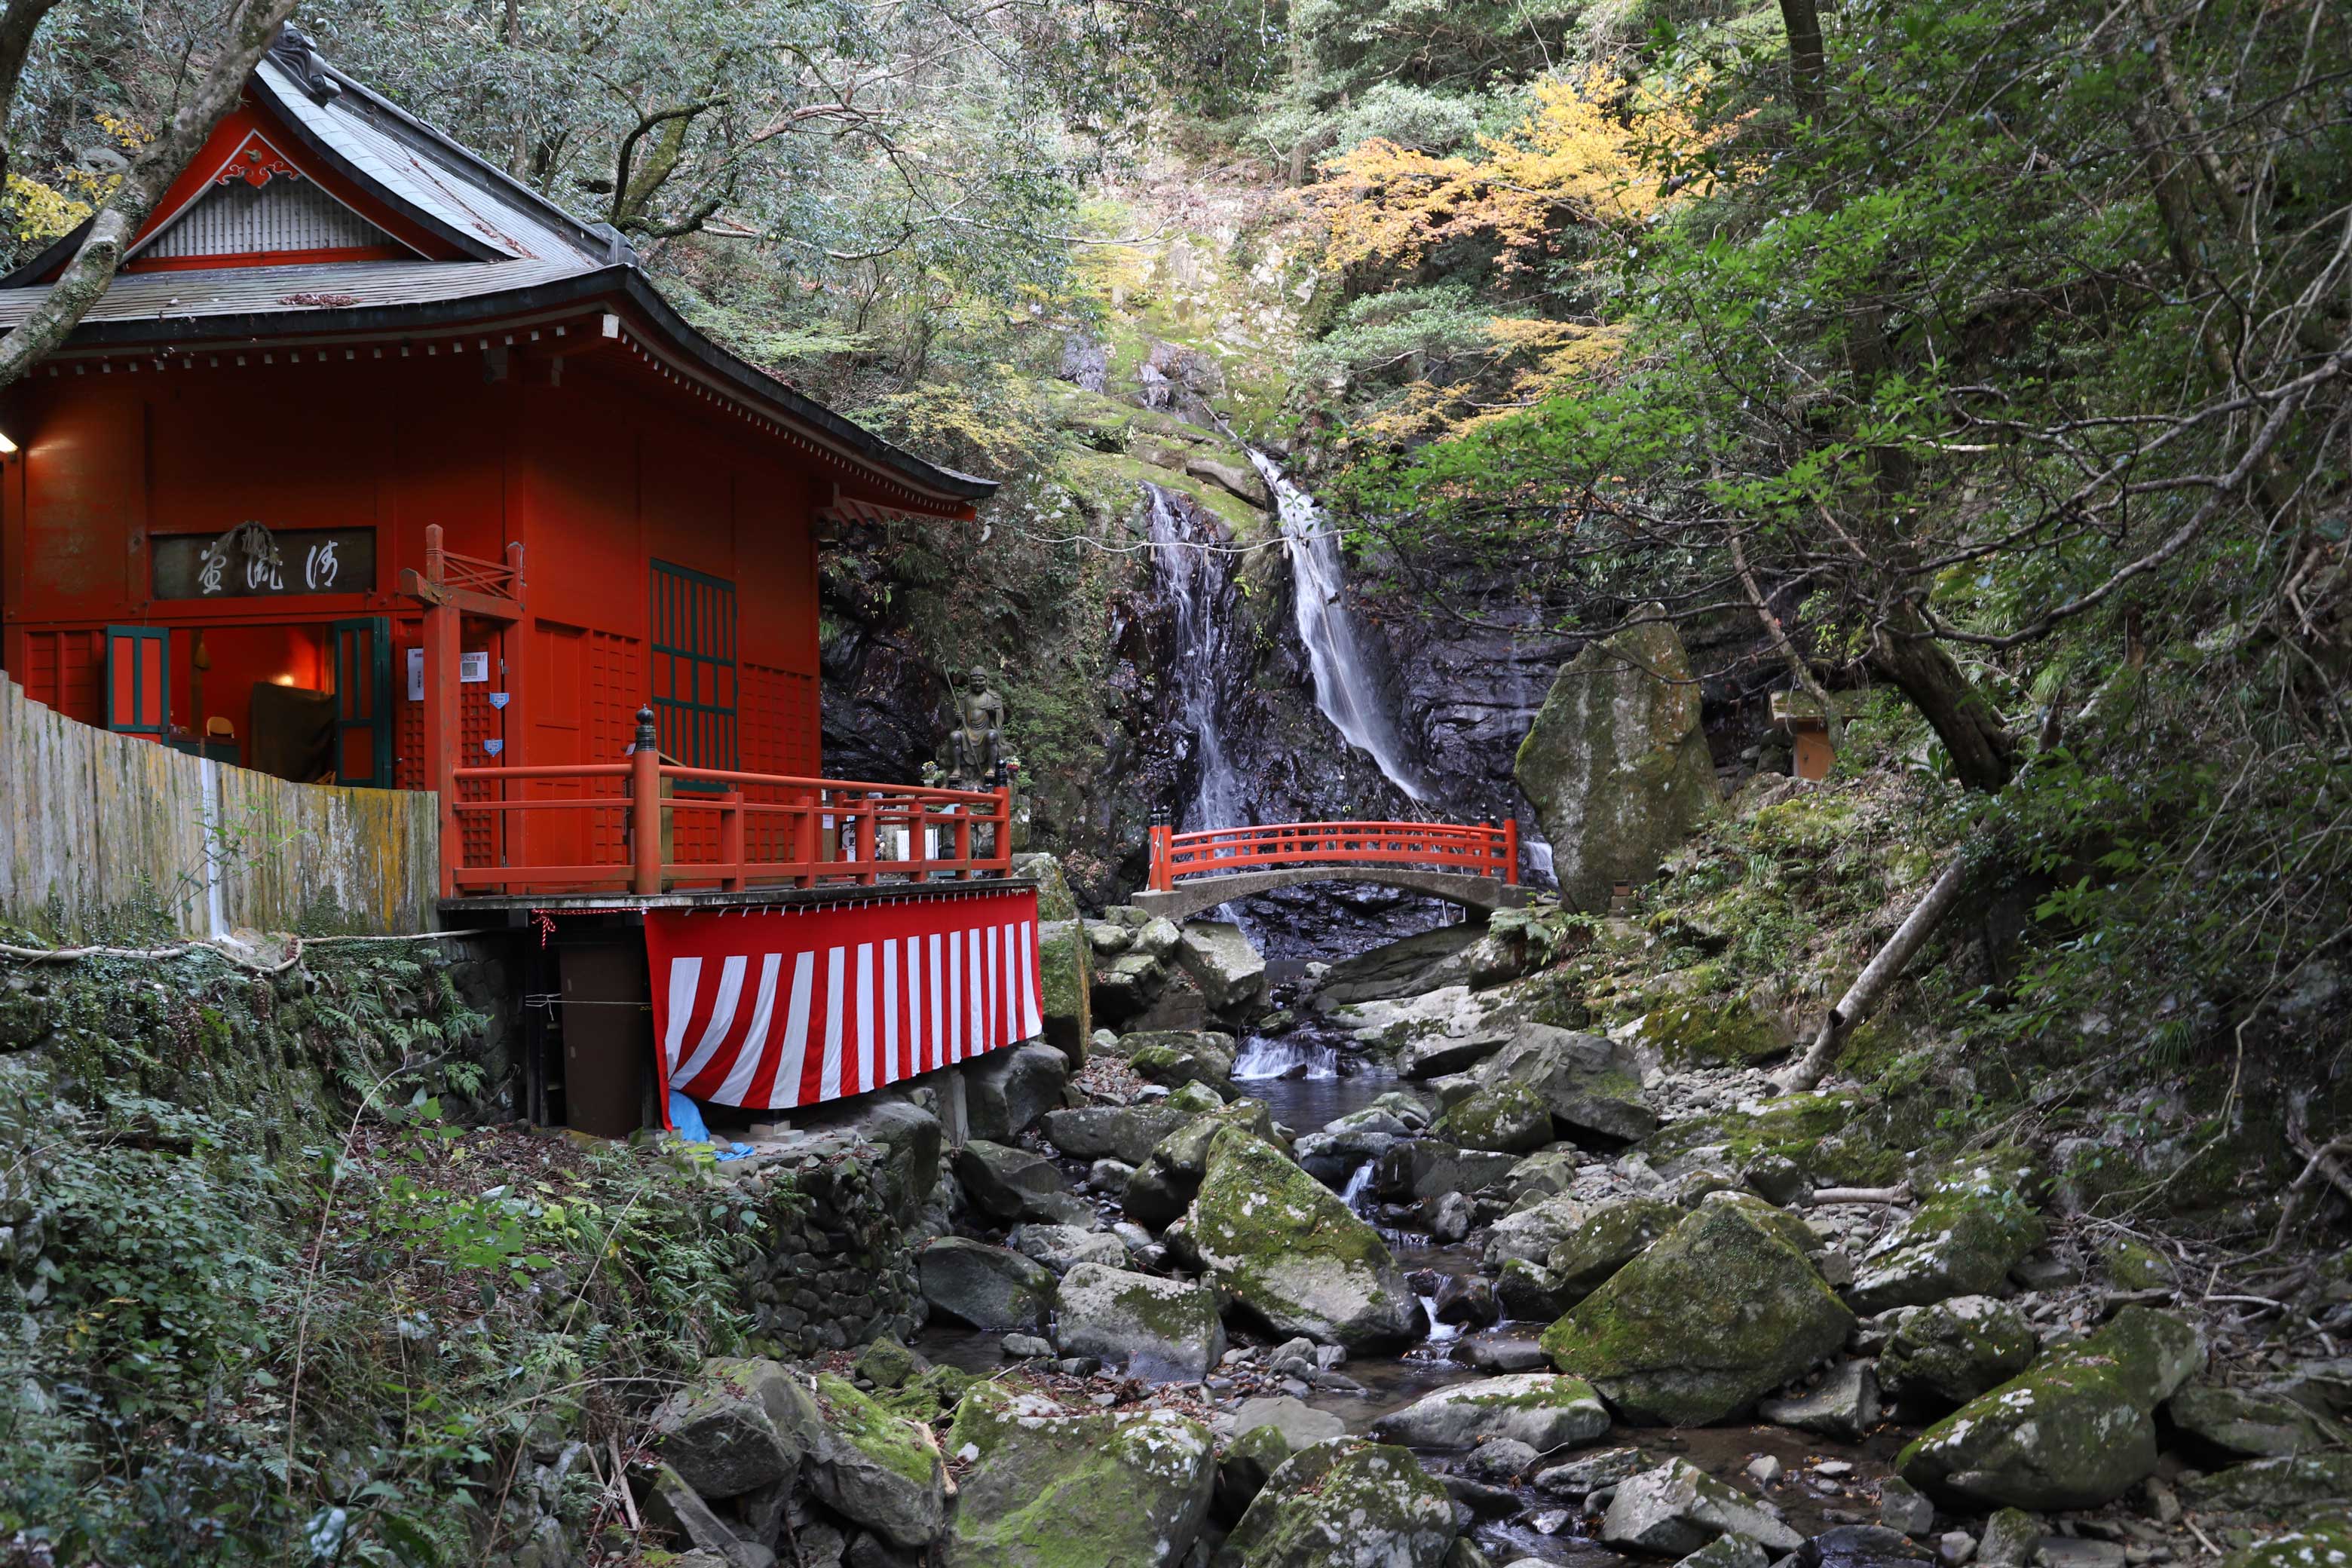 Visit Japan's oldest sacred place to experience traditional culture